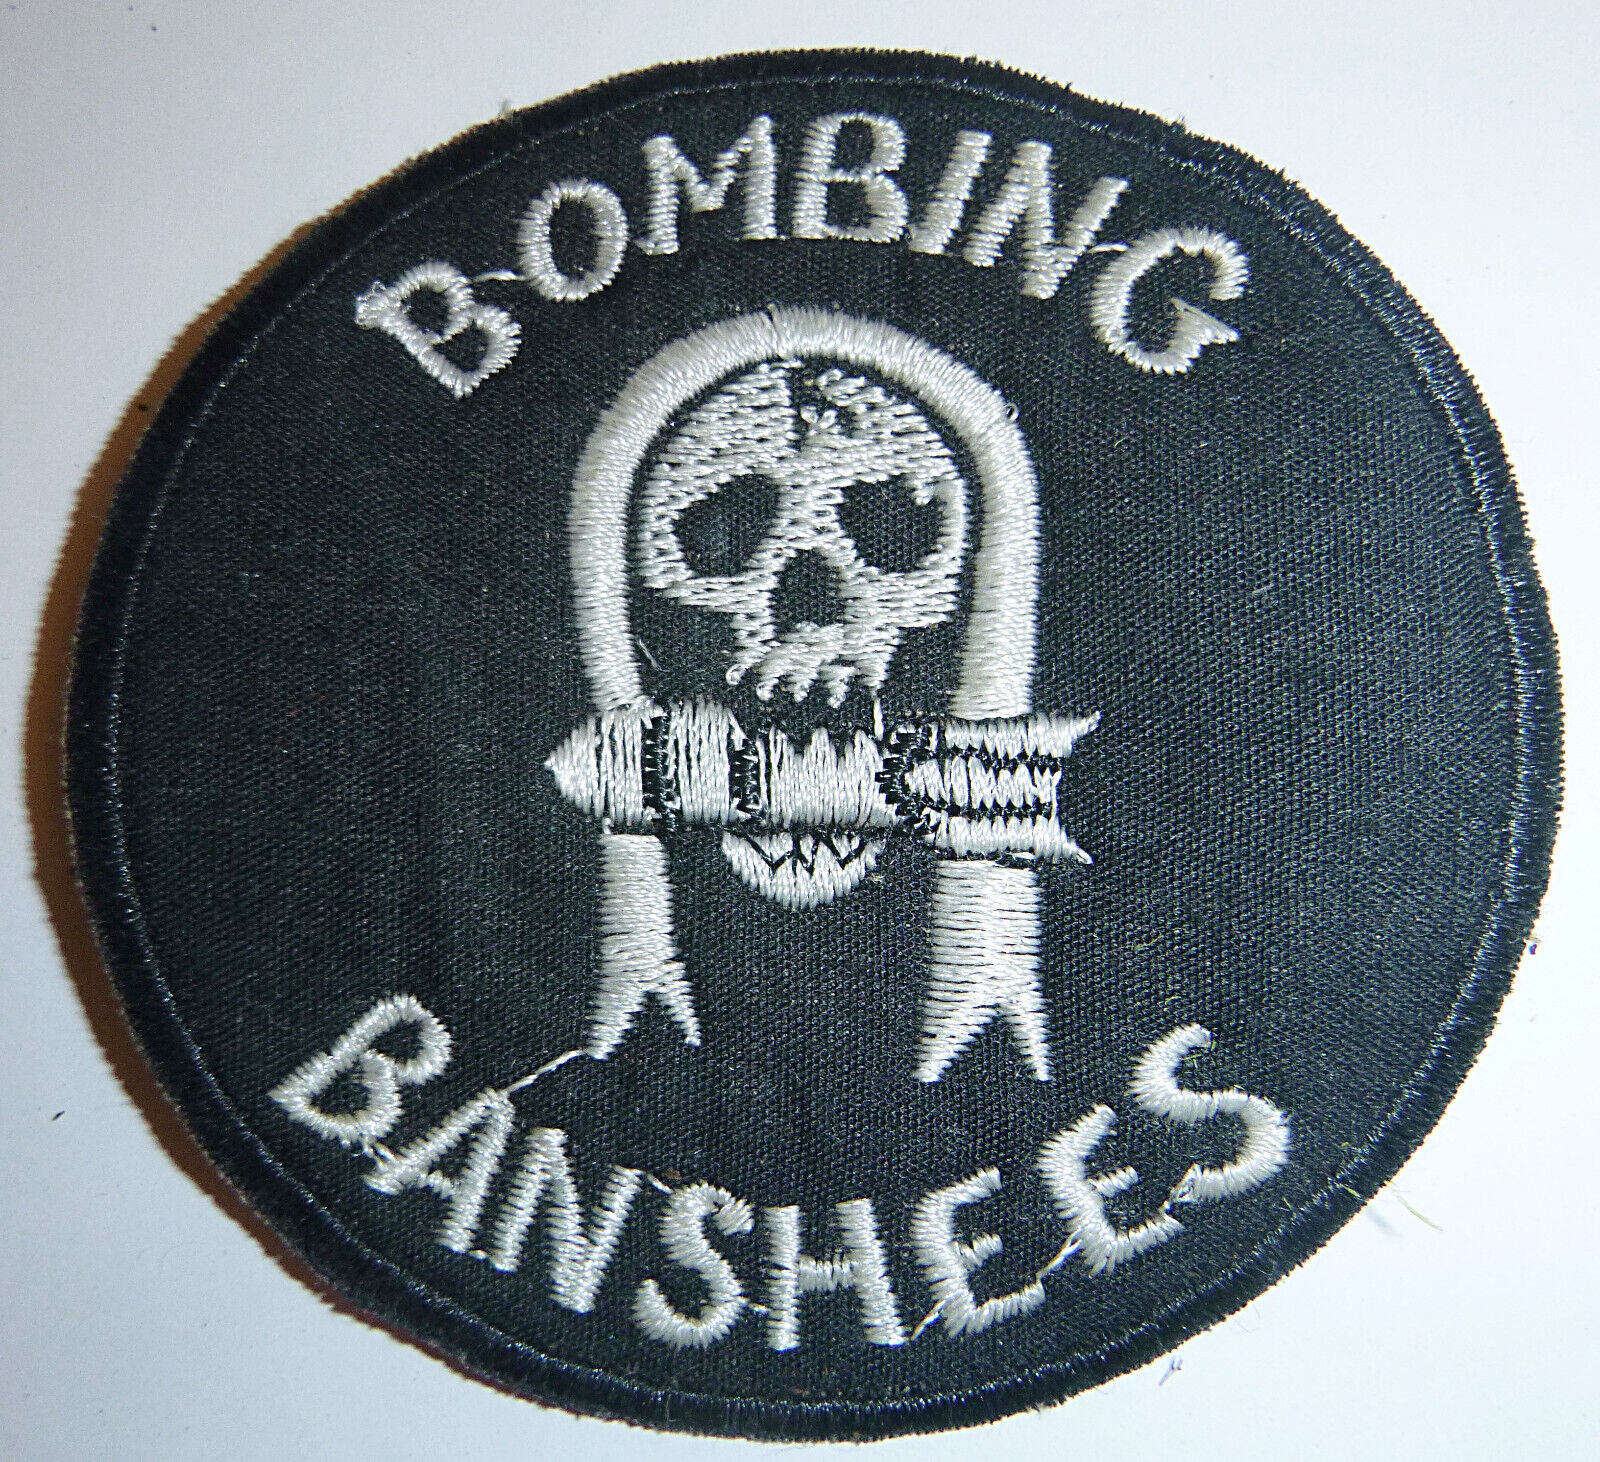 BANSHEE - Patch - Bombing Banshee's - Dive Bomber - Air Attack - WWII - M.150